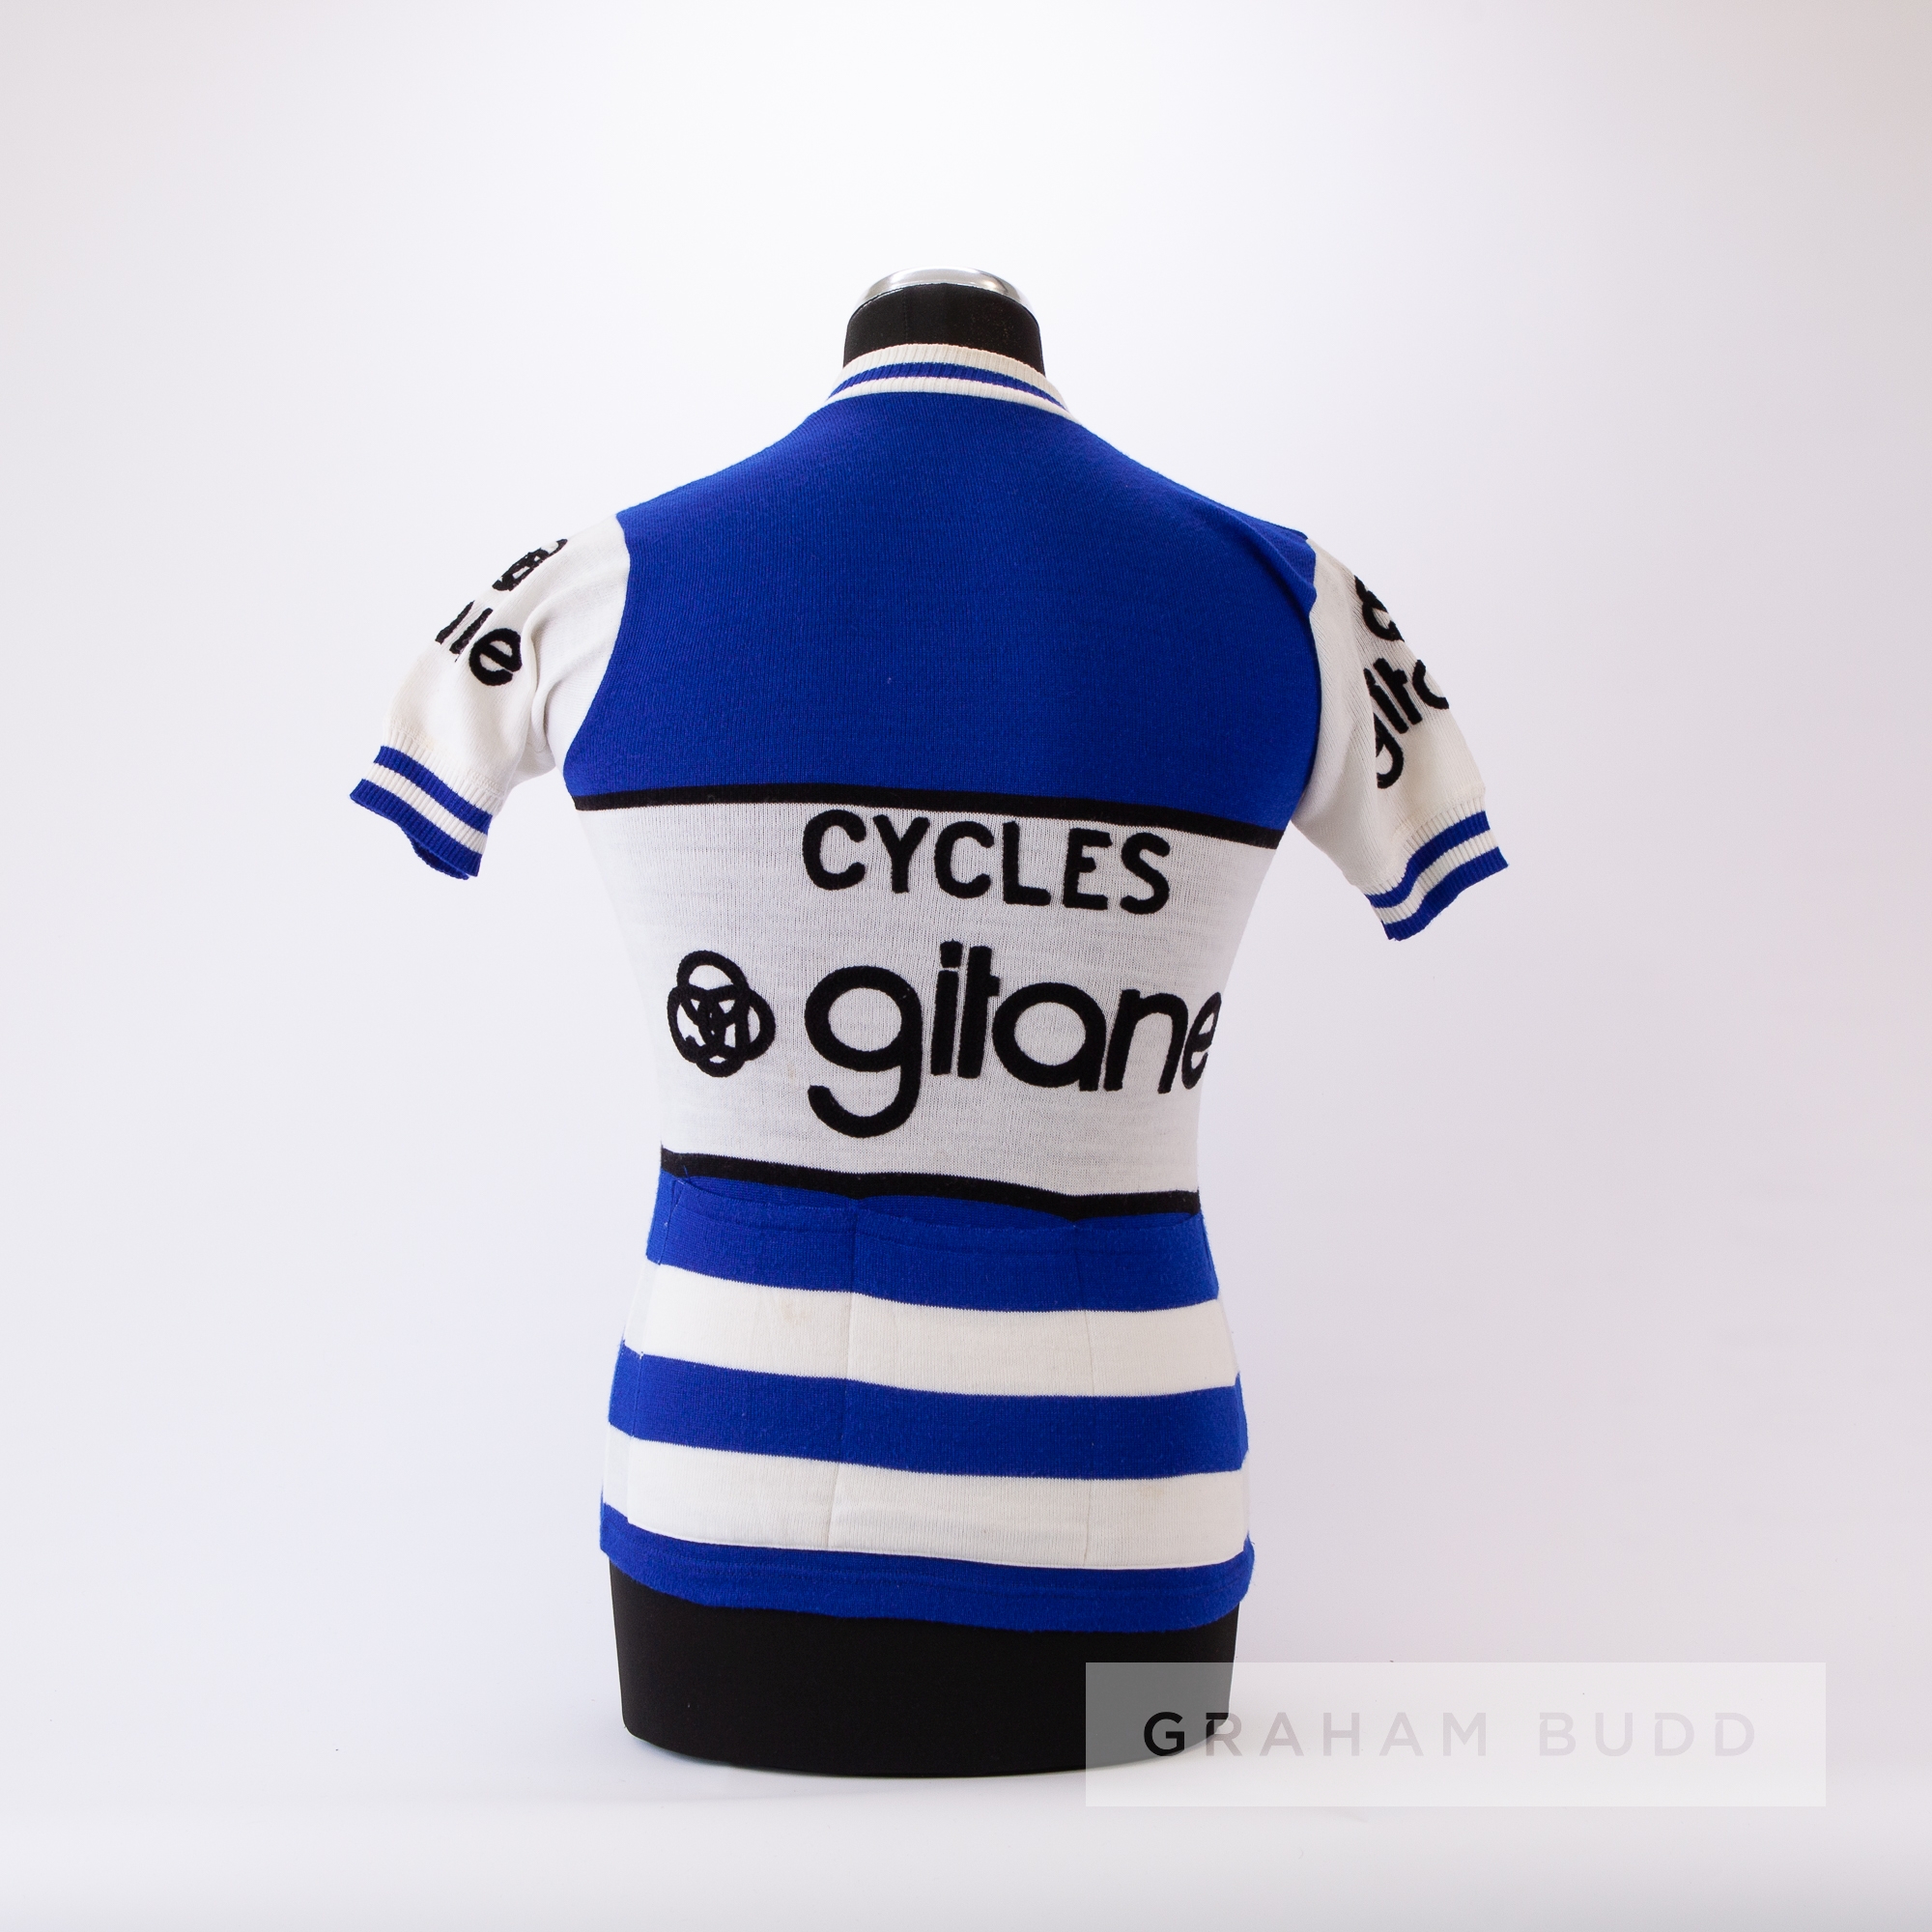 1982 white, blue and black Cycles Gitane Cycling race jersey, scarce, acrylic short-sleeved jersey - Image 4 of 4